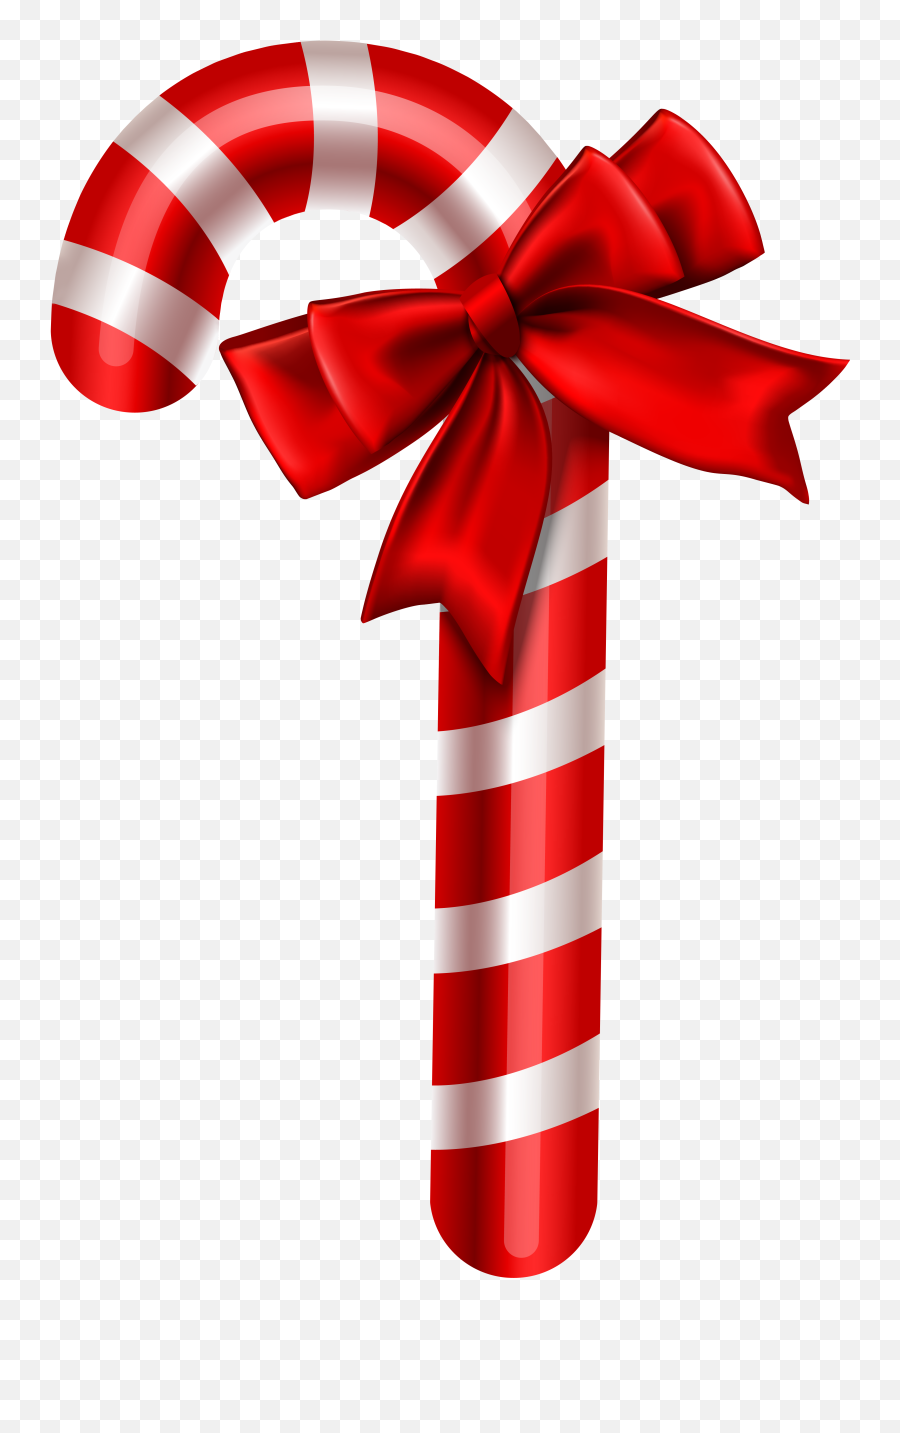 Download Christmas Ornament Candy Cane Png Canes